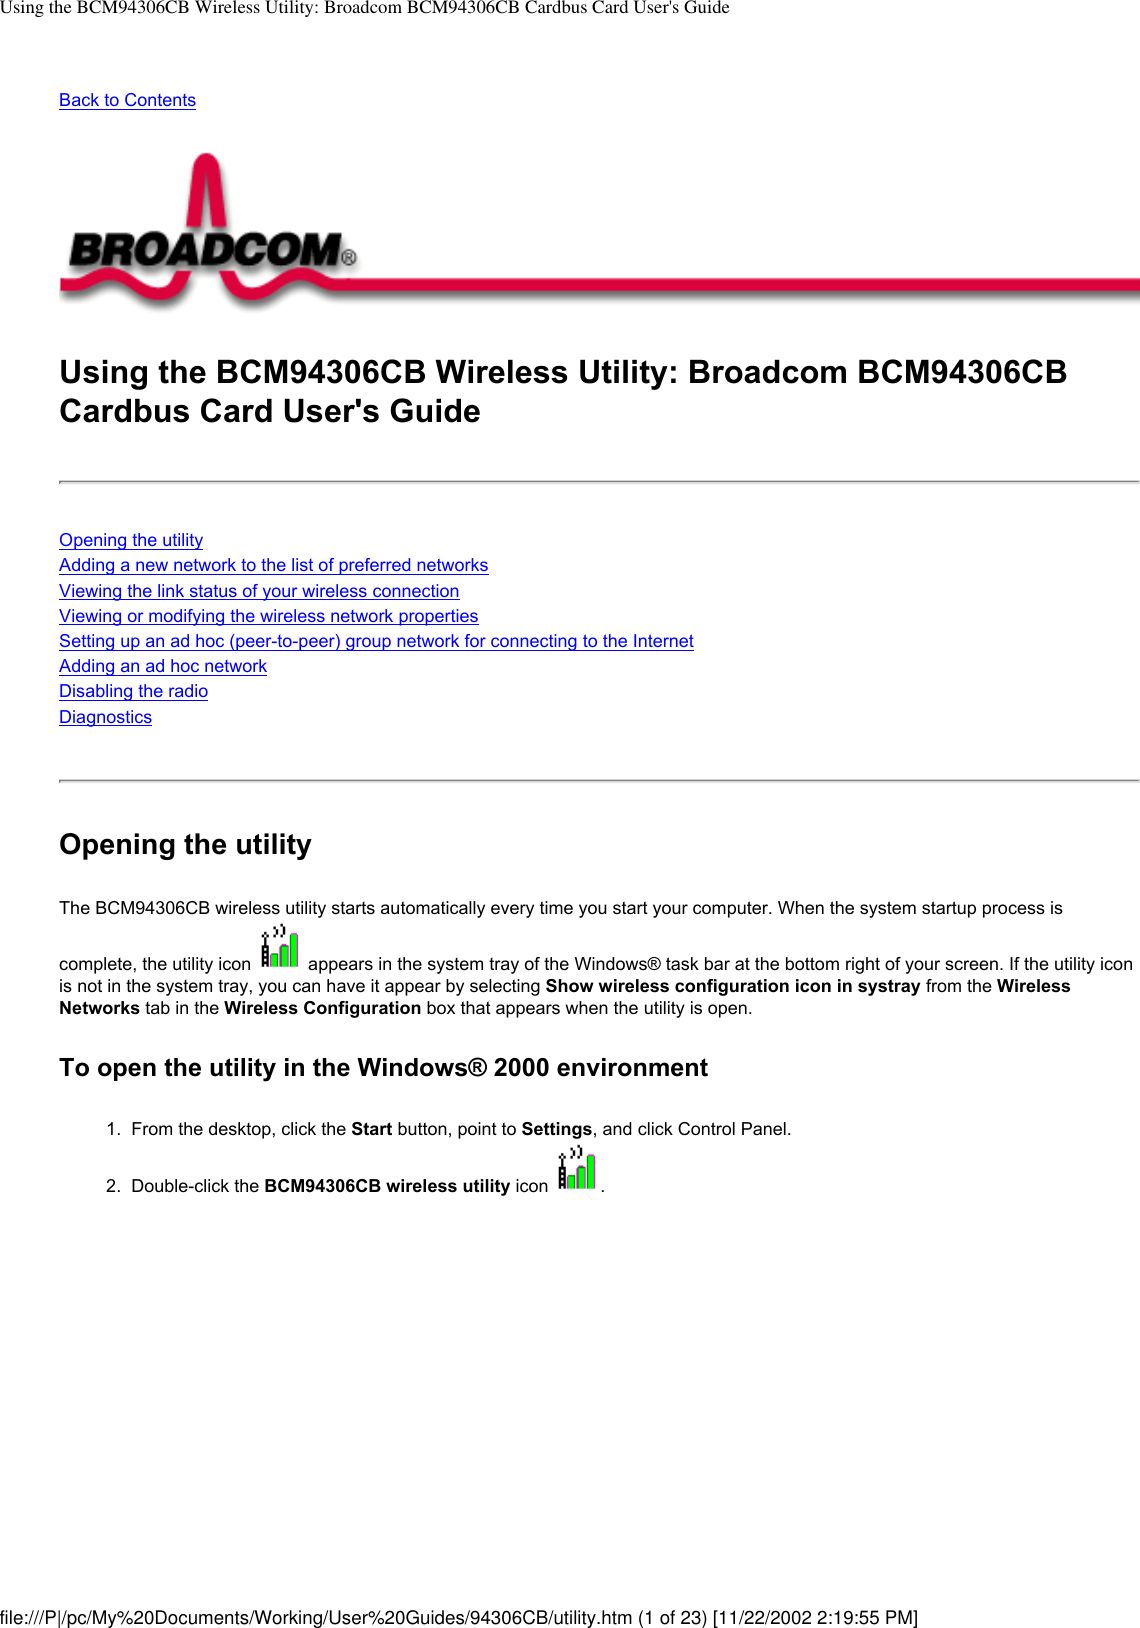 Using the BCM94306CB Wireless Utility: Broadcom BCM94306CB Cardbus Card User&apos;s GuideBack to ContentsUsing the BCM94306CB Wireless Utility: Broadcom BCM94306CB Cardbus Card User&apos;s GuideOpening the utilityAdding a new network to the list of preferred networksViewing the link status of your wireless connectionViewing or modifying the wireless network propertiesSetting up an ad hoc (peer-to-peer) group network for connecting to the InternetAdding an ad hoc networkDisabling the radioDiagnosticsOpening the utilityThe BCM94306CB wireless utility starts automatically every time you start your computer. When the system startup process is complete, the utility icon   appears in the system tray of the Windows® task bar at the bottom right of your screen. If the utility icon is not in the system tray, you can have it appear by selecting Show wireless configuration icon in systray from the Wireless Networks tab in the Wireless Configuration box that appears when the utility is open.To open the utility in the Windows® 2000 environment1.  From the desktop, click the Start button, point to Settings, and click Control Panel.2.  Double-click the BCM94306CB wireless utility icon  . file:///P|/pc/My%20Documents/Working/User%20Guides/94306CB/utility.htm (1 of 23) [11/22/2002 2:19:55 PM]